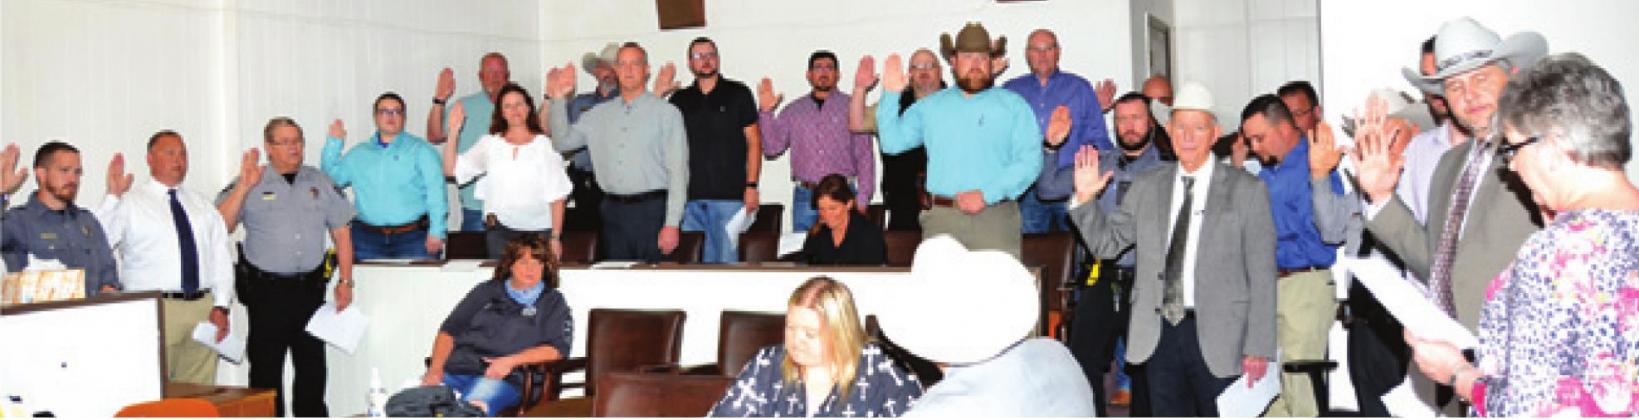 BURLESON COUNTY SHERIFF’S DEPUTIES are sworn into office by County Clerk Anna Schielack on Sunday at the county courthouse. -- Tribune photo by Roy Sanders